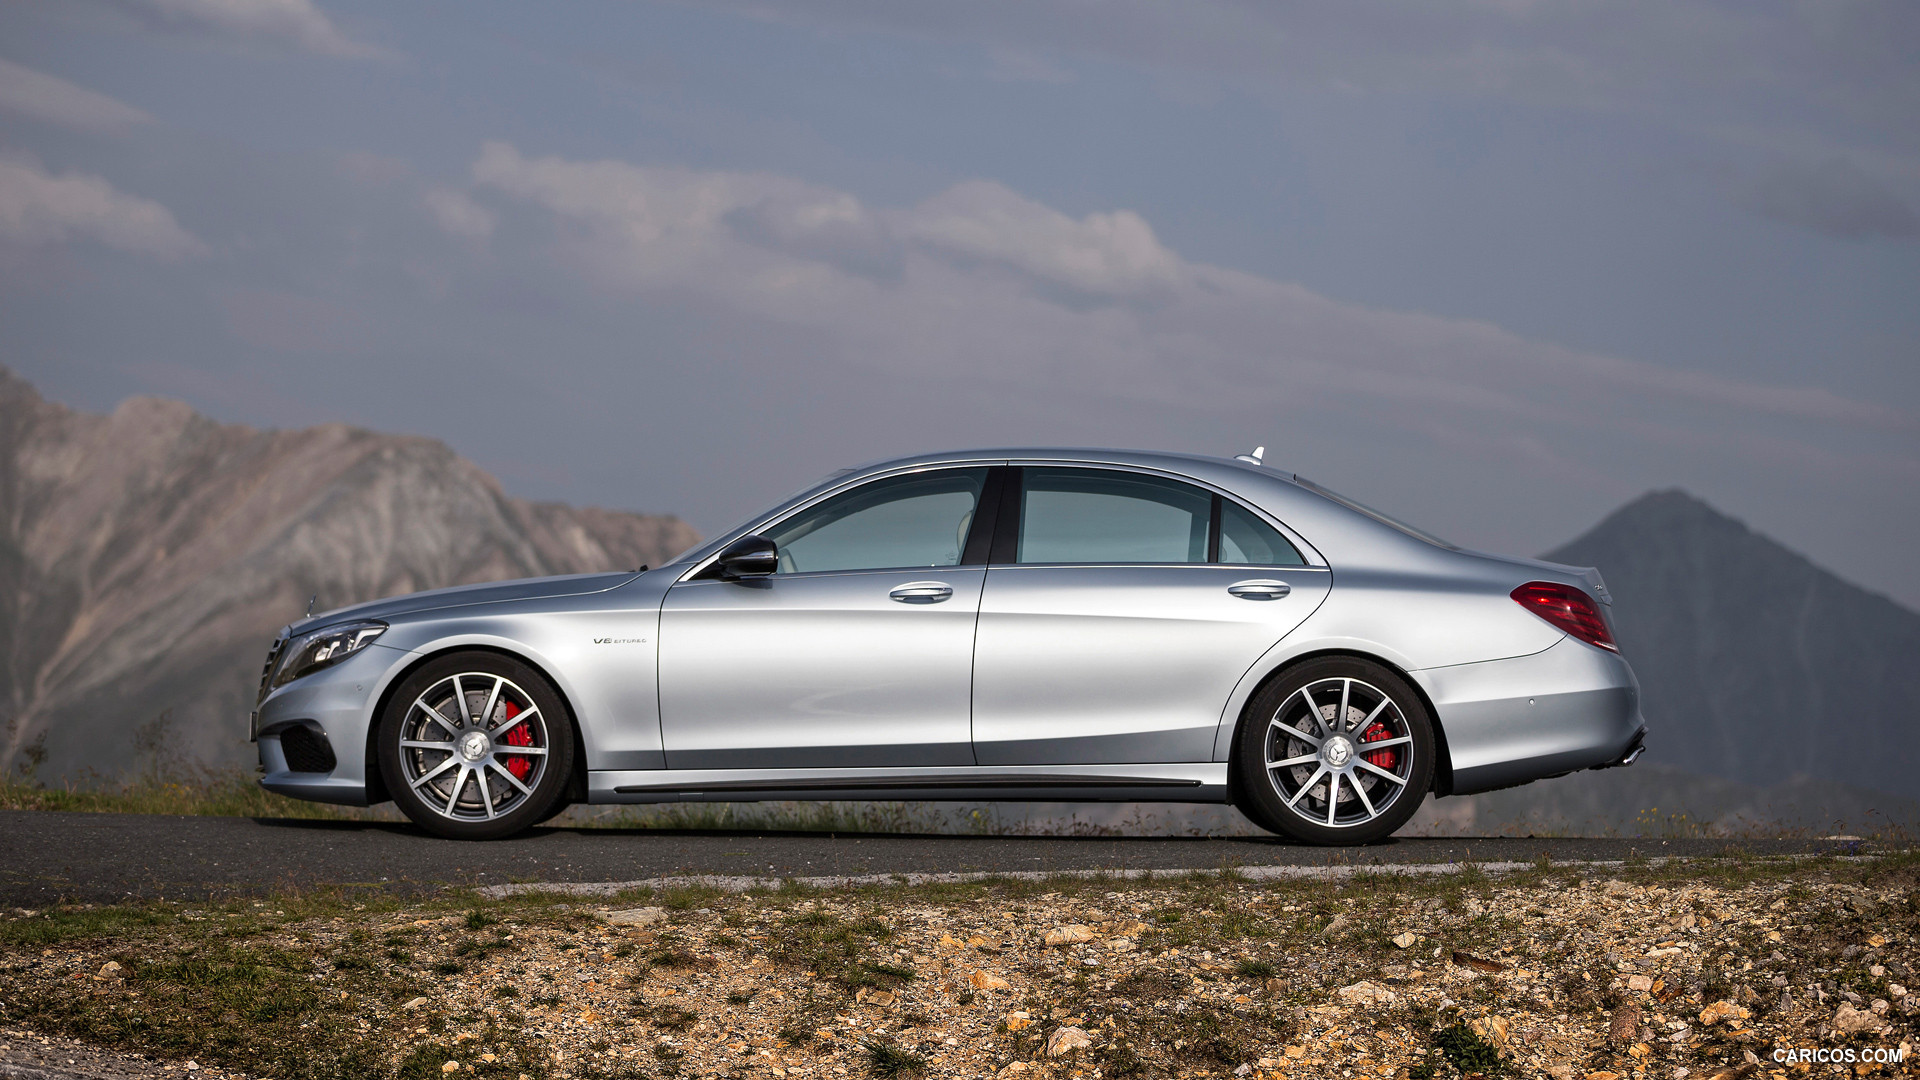 Mercedes-Benz S63 AMG W222 (2014)  - Side, #24 of 102